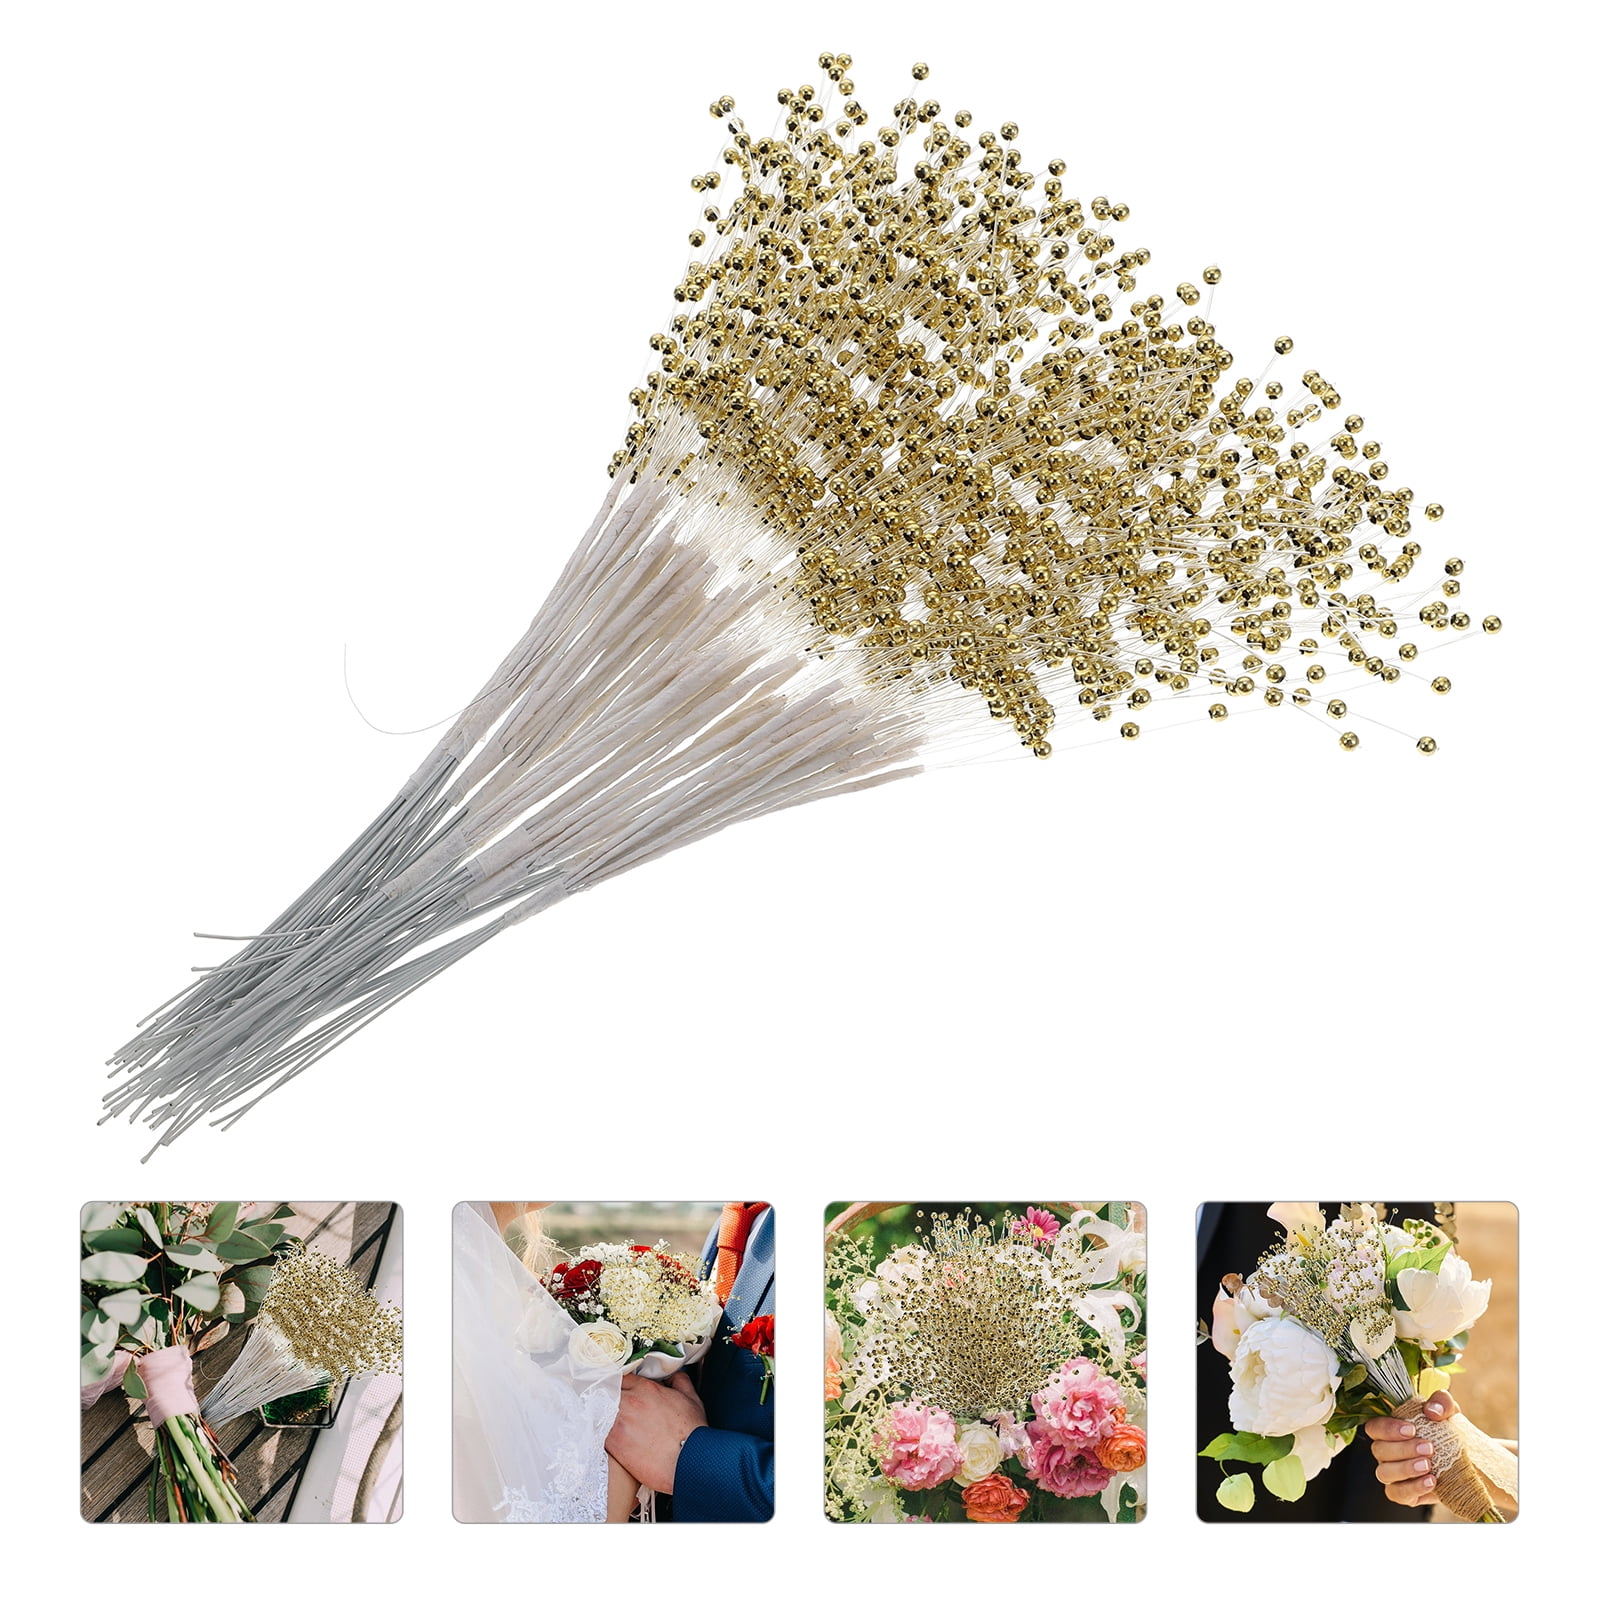  IMIKEYA Pearl Stick Stems Bouquets: 100pcs String Pearls Sticks,  4mm Bead String Garland Pearls String Floral Beaded Sticks Picks for Wedding  Christmas Party Home Decor DIY Crafts : Arts, Crafts 